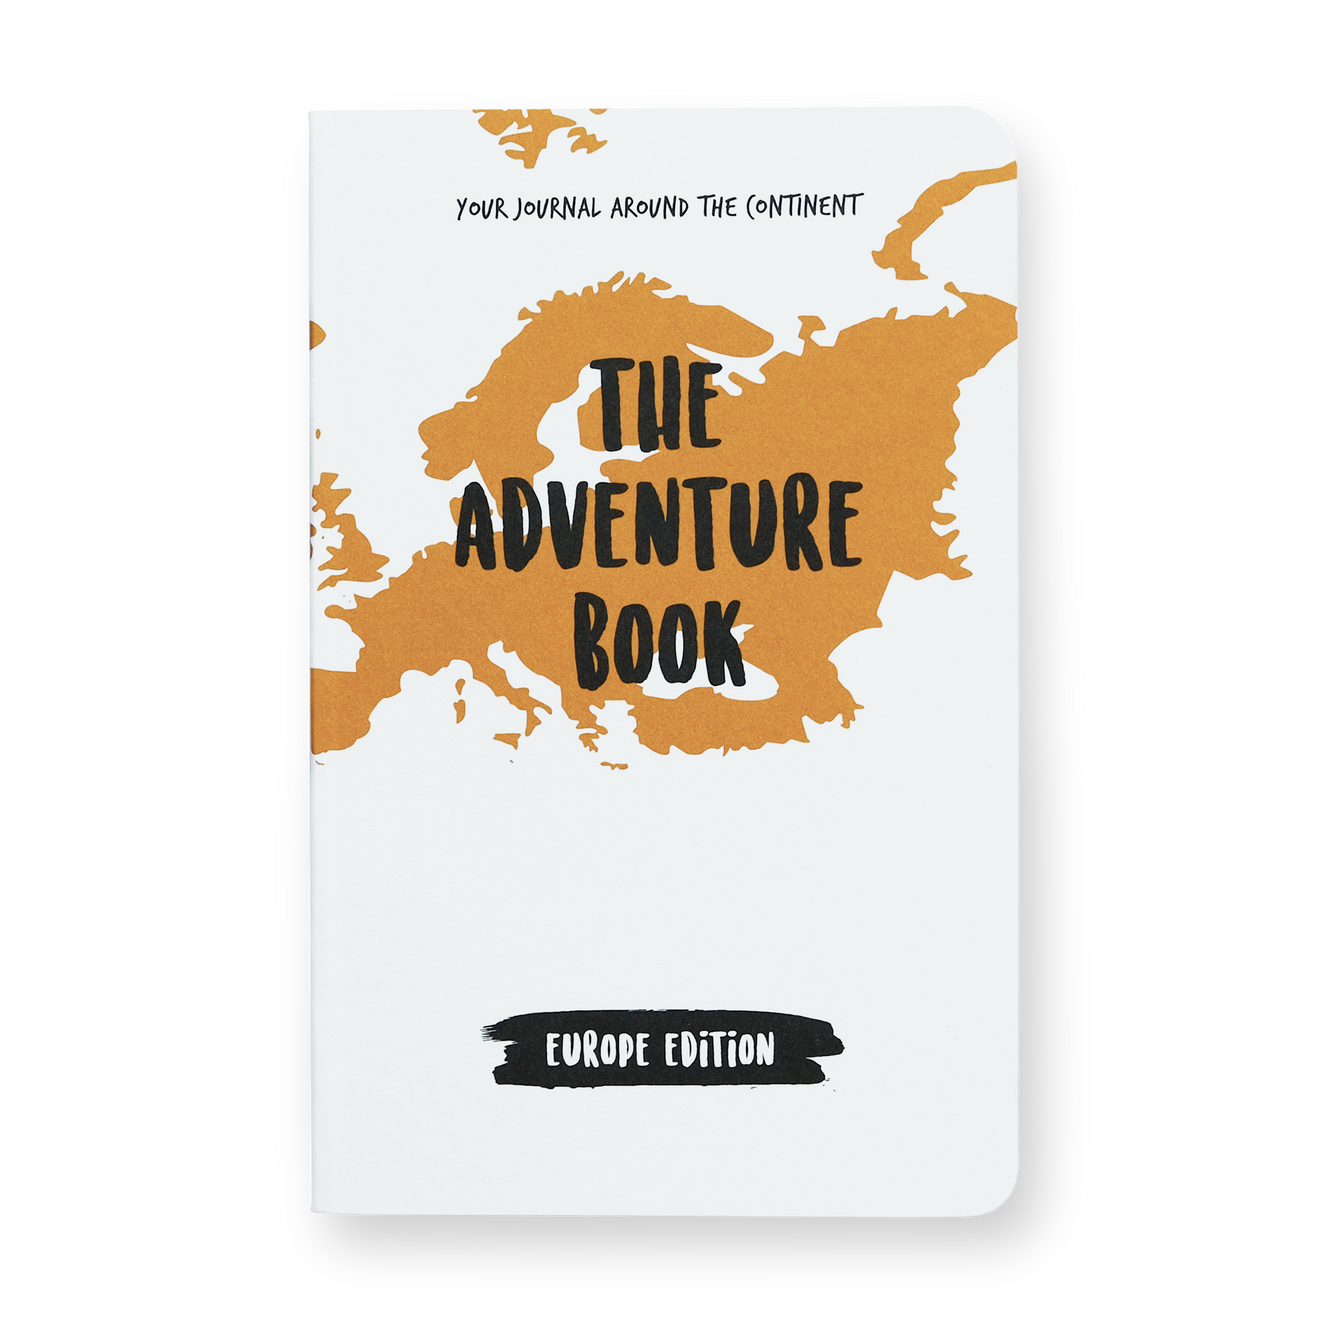 The Adventure Book Europe Edition - Europe